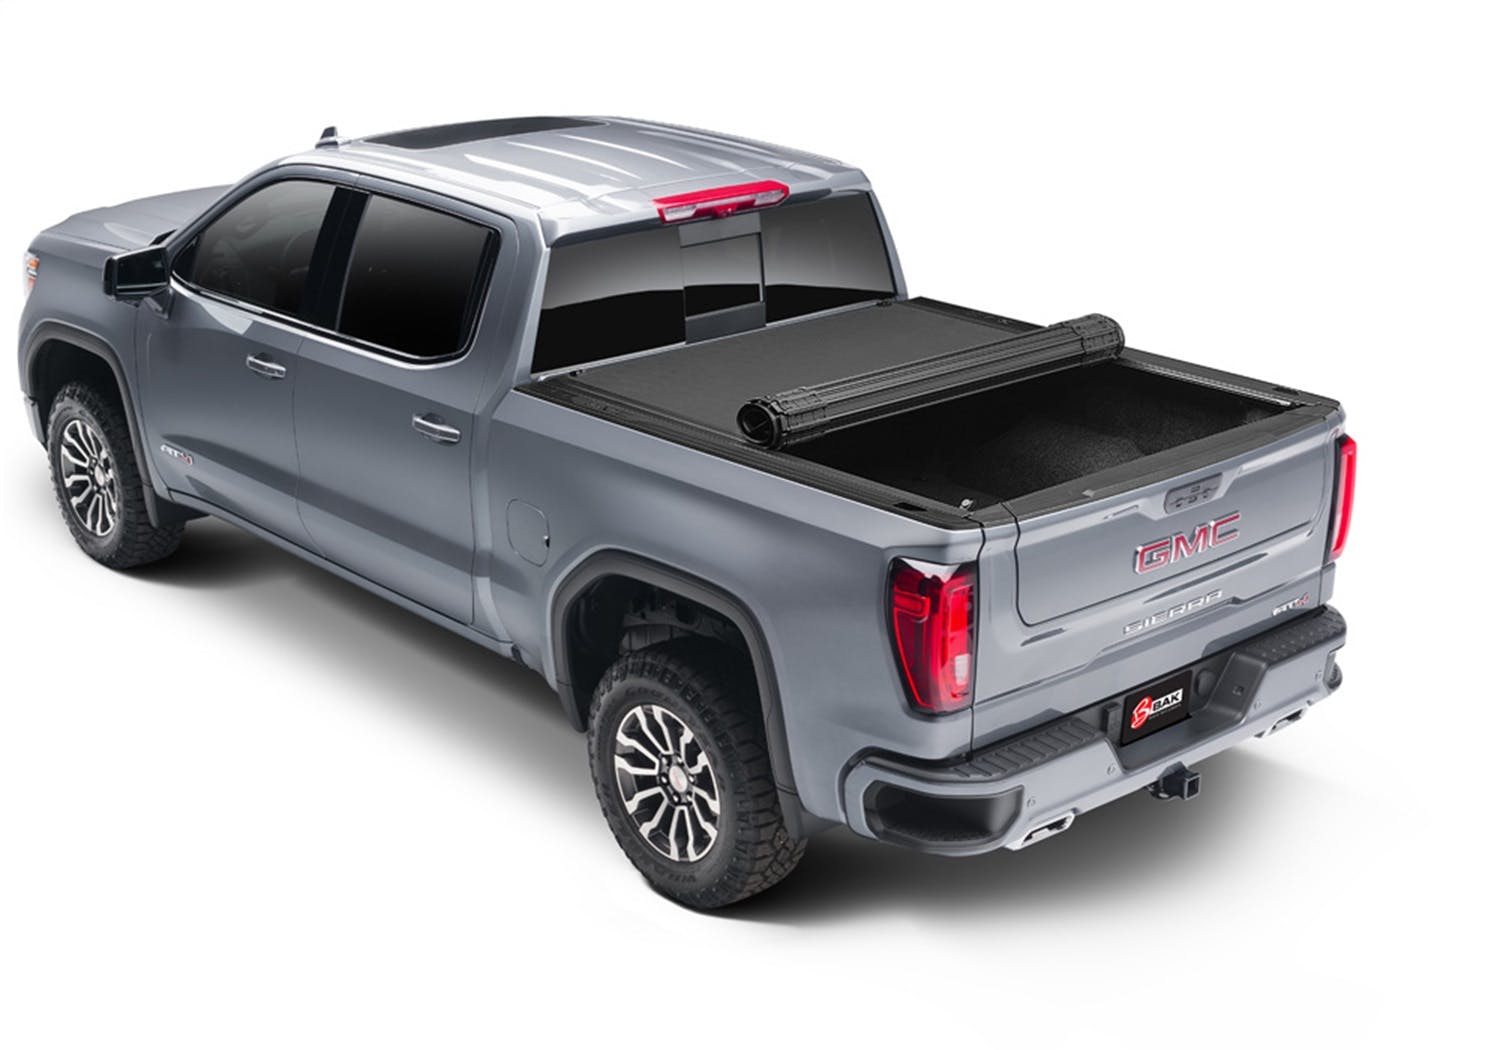 BAK Industries 80101 Revolver X4s Hard Rolling Truck Bed Cover